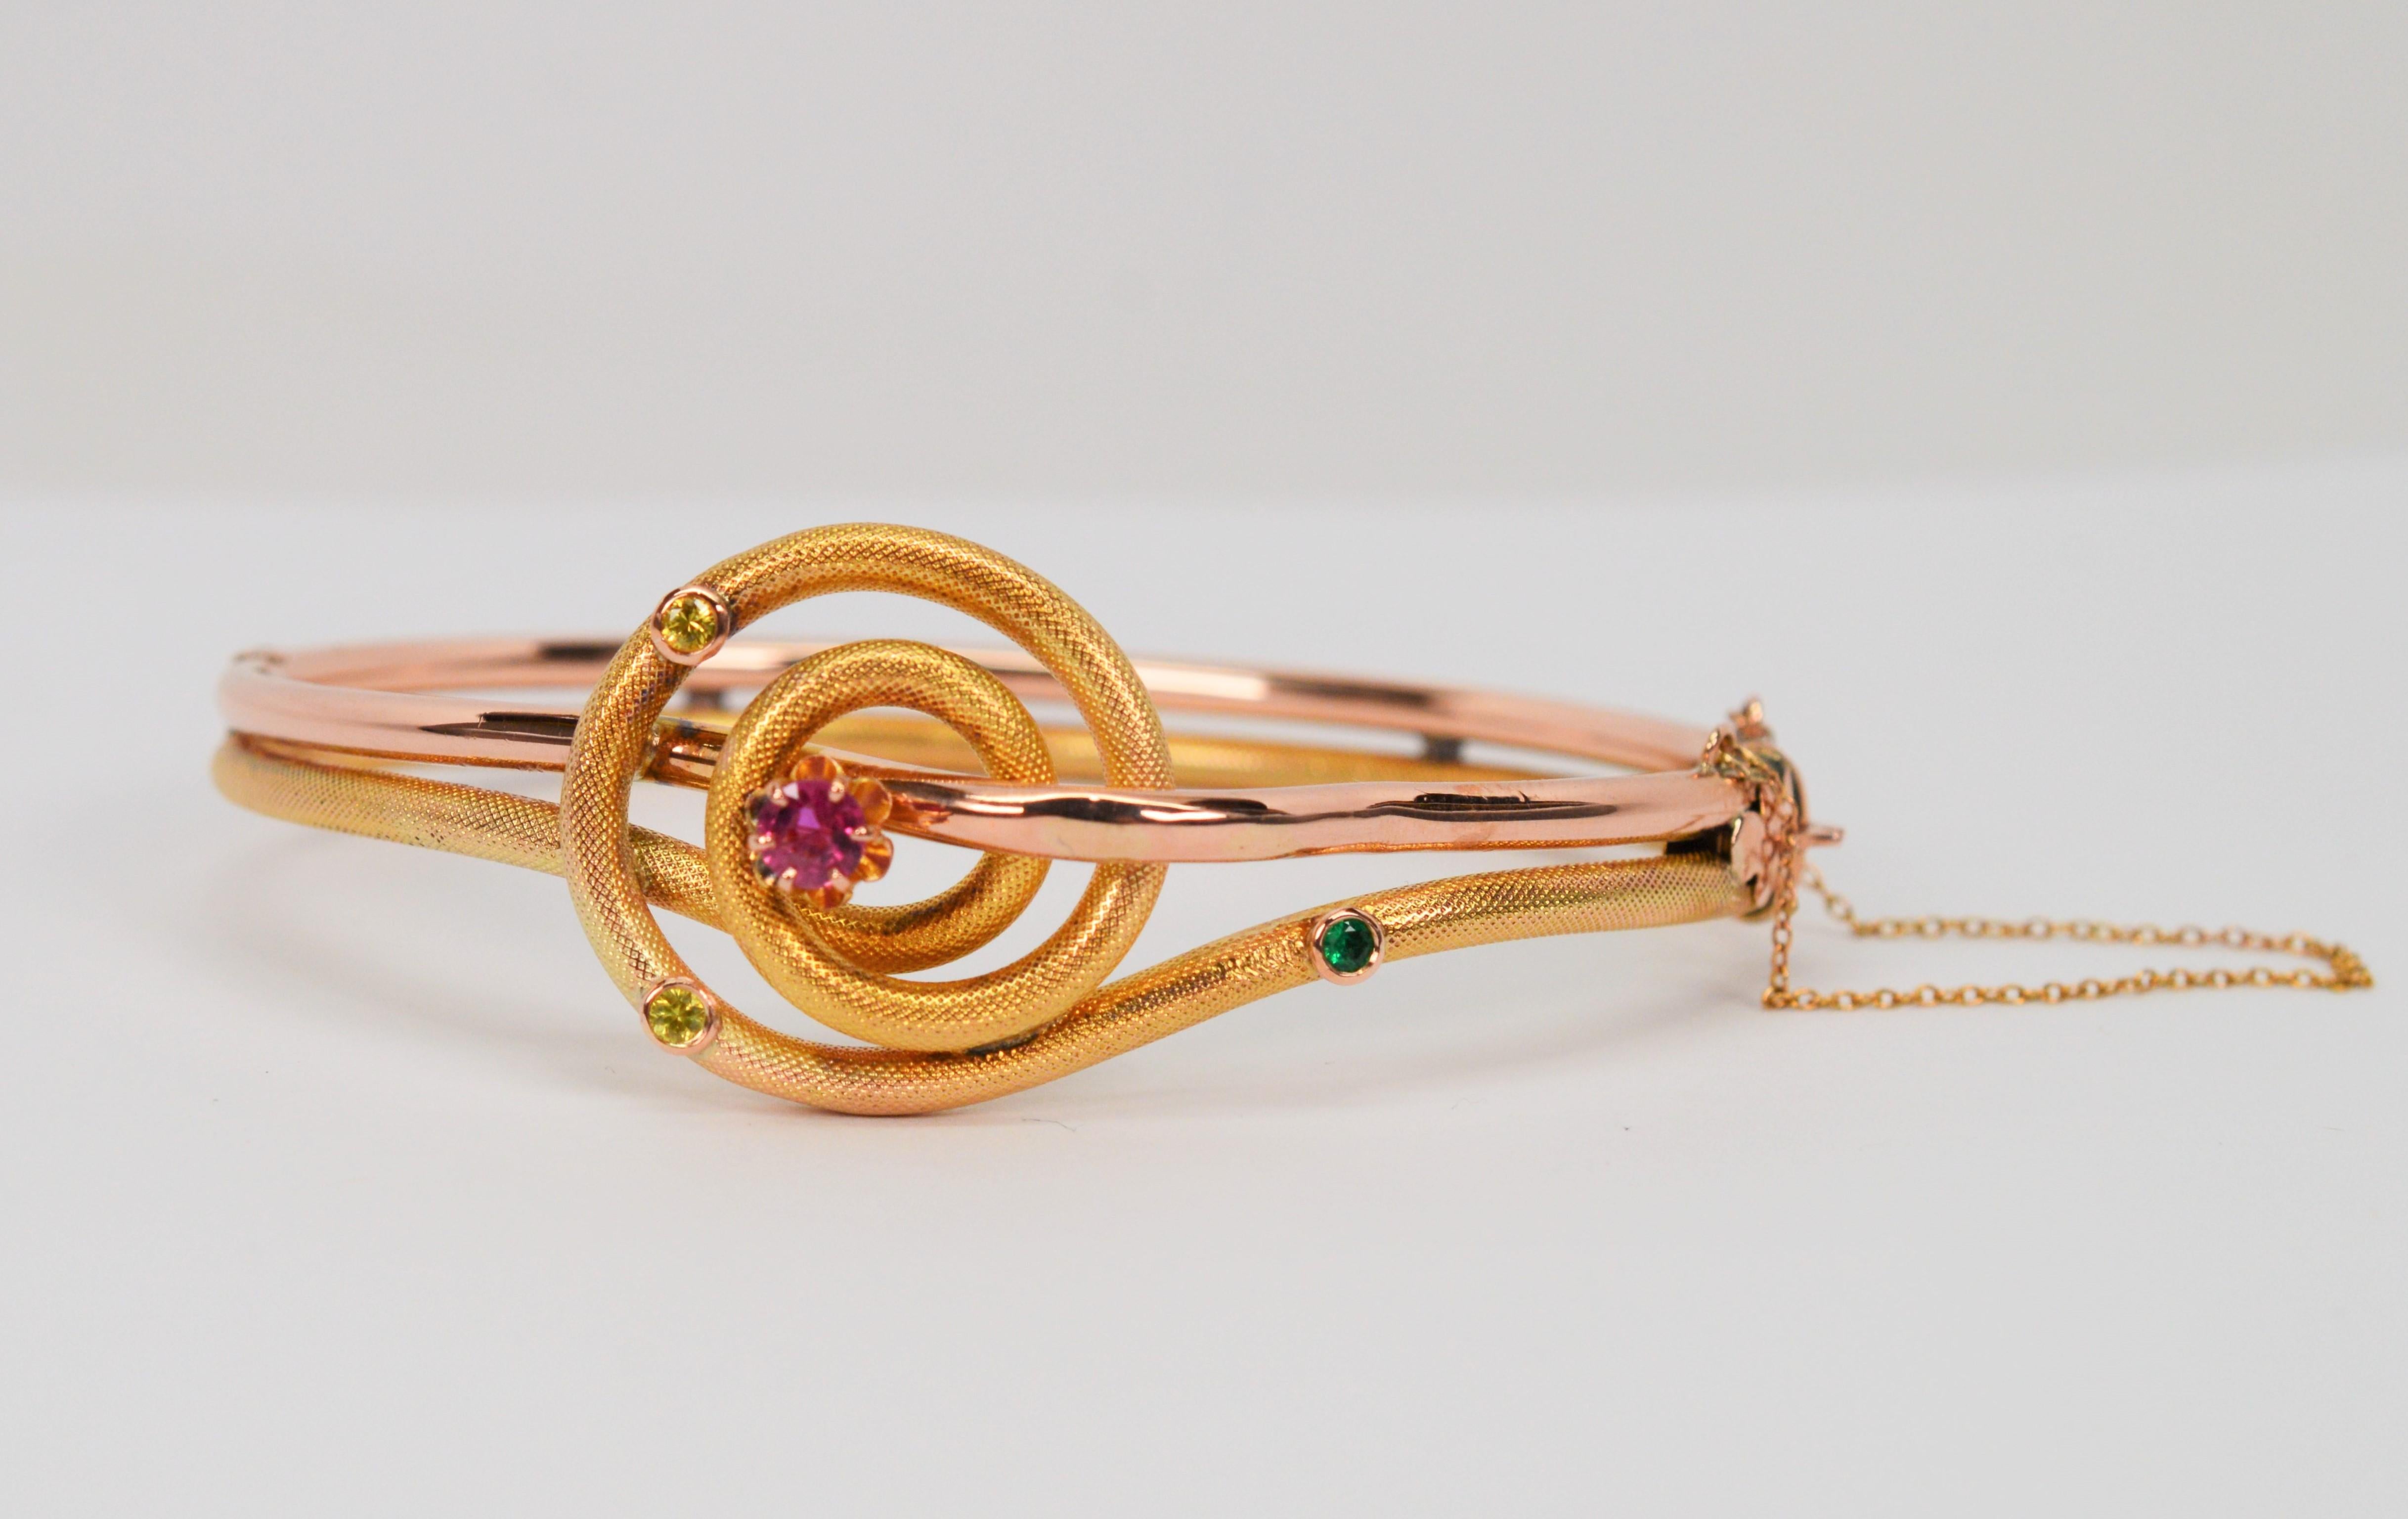 Artful swirls of textured 14 karat yellow gold intertwined with the warmth of rose gold lend a whimsical look to this unique vintage bangle bracelet. Asymmetrically placed colorful gemstone accents including ruby, emerald and yellow sapphire